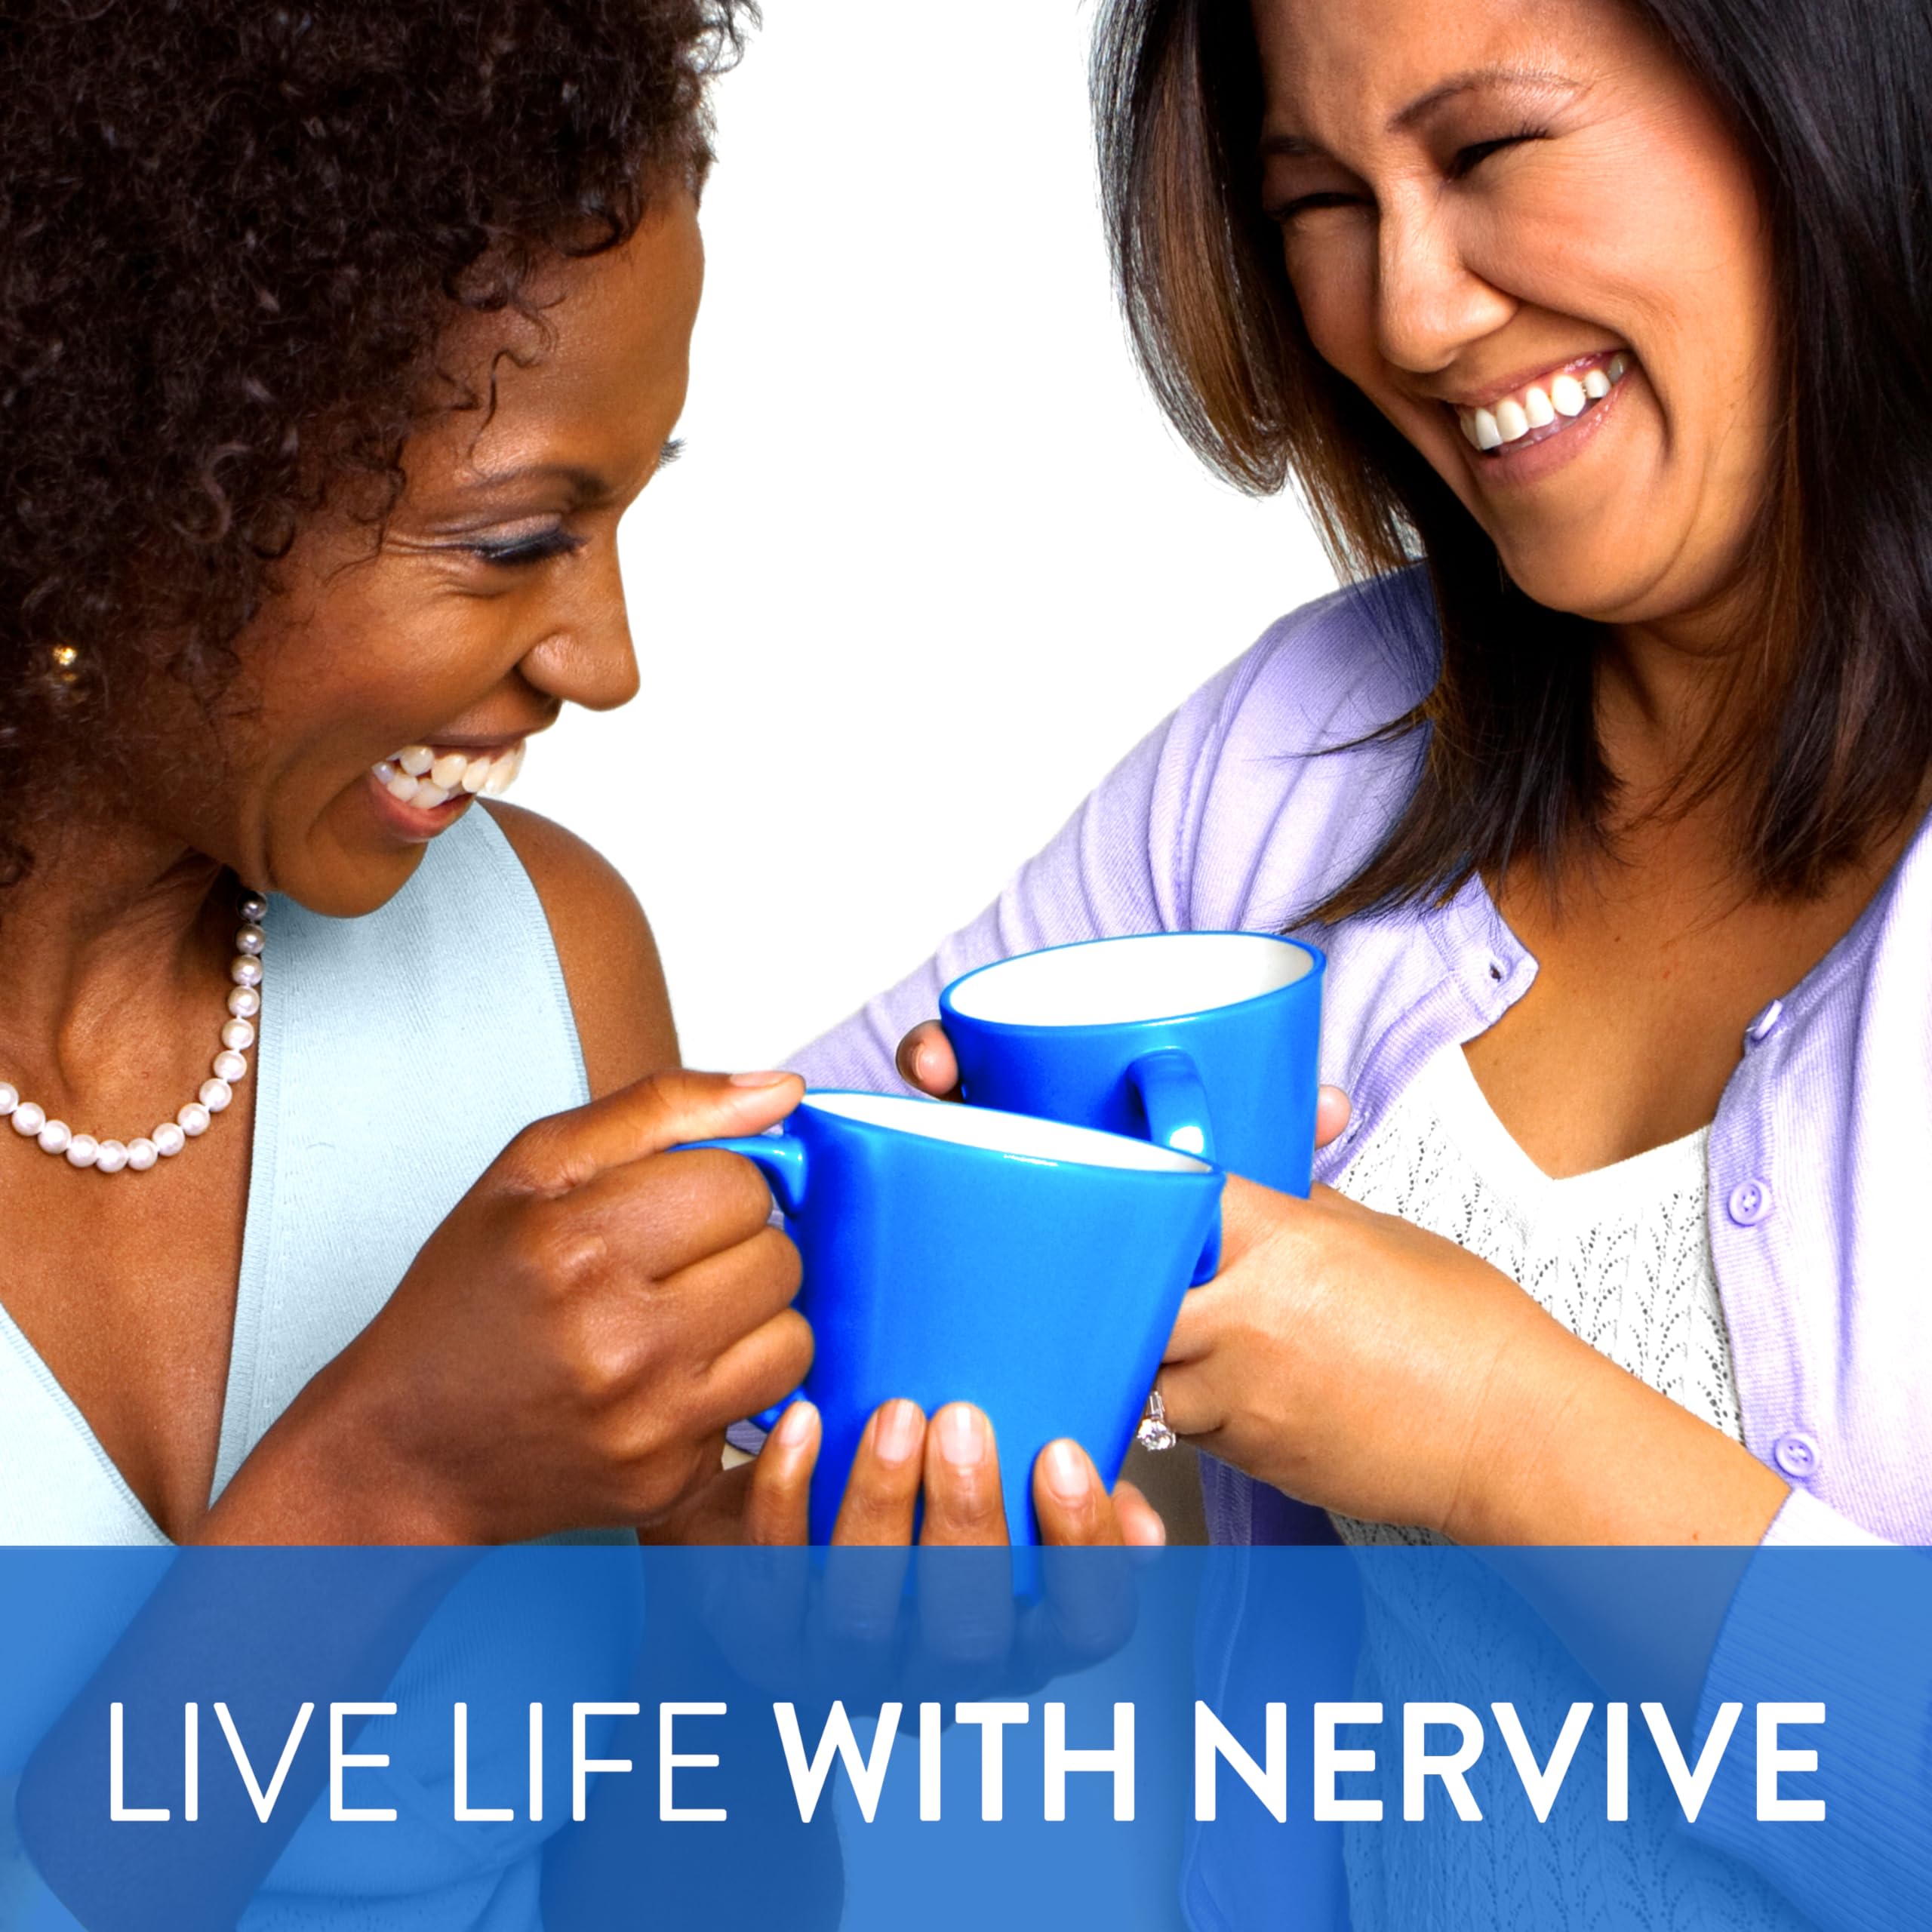 Nervive Nerve Relief, Helps Relieve Pain associated with Peripheral Neuropathy, Alpha Lipoic Acid ALA, Vitamins B1-Thiamine, B6, & B12, Turmeric, Ginger,30-Day Supply, 30 Ct